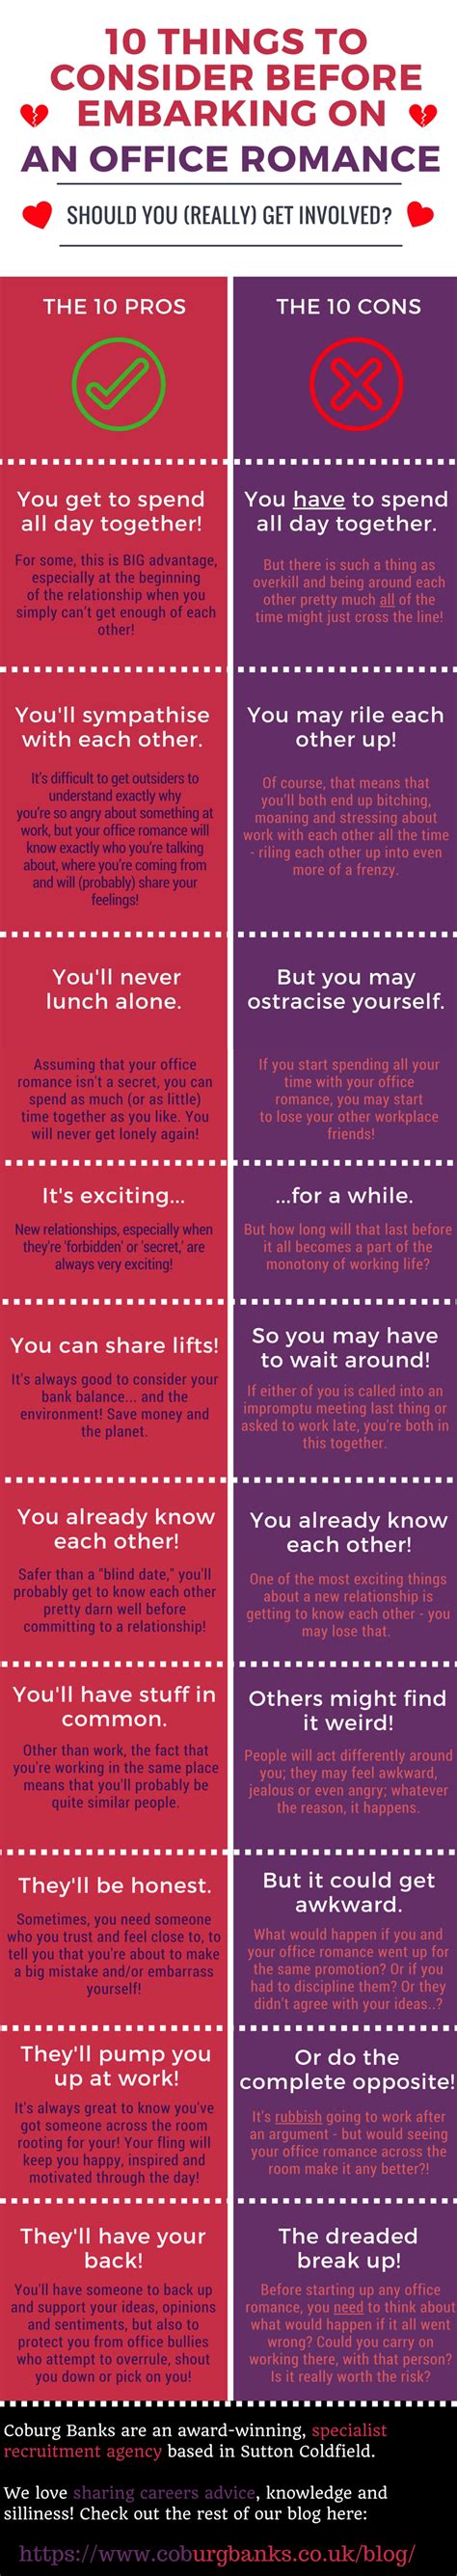 10 Things To Consider Before Embarking On An Office Romance Infographic